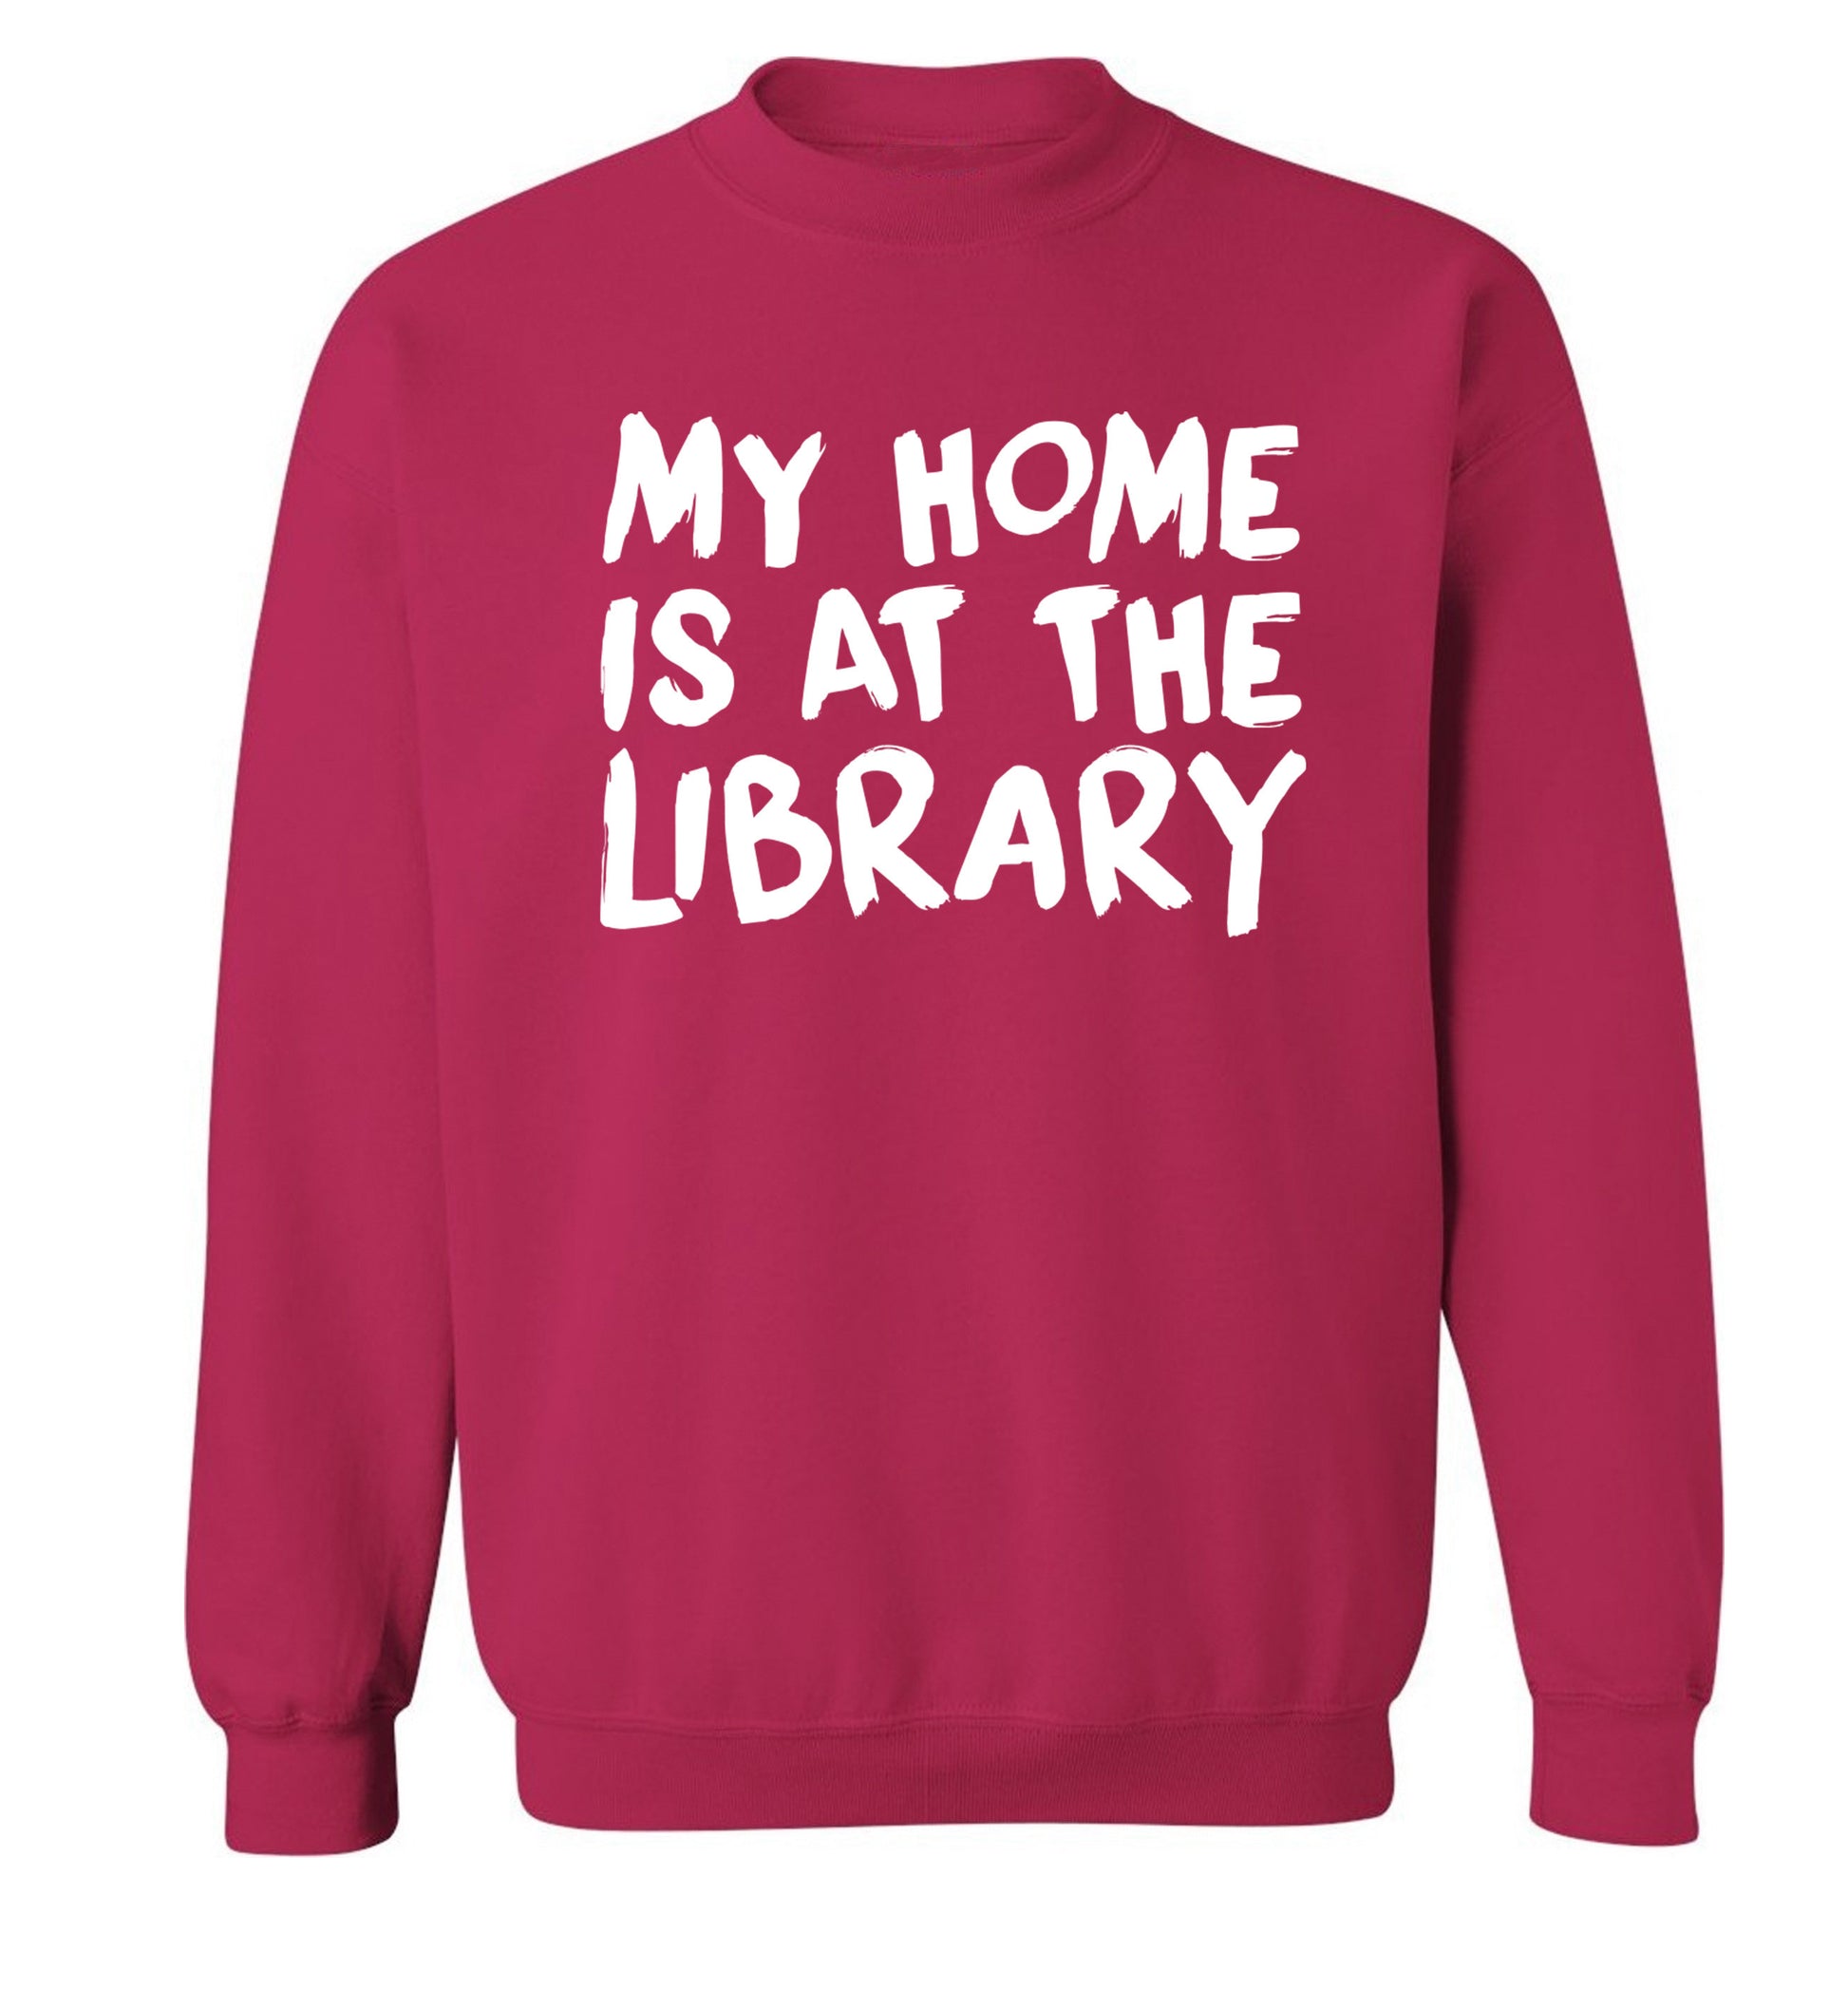 My home is at the library Adult's unisex pink Sweater 2XL